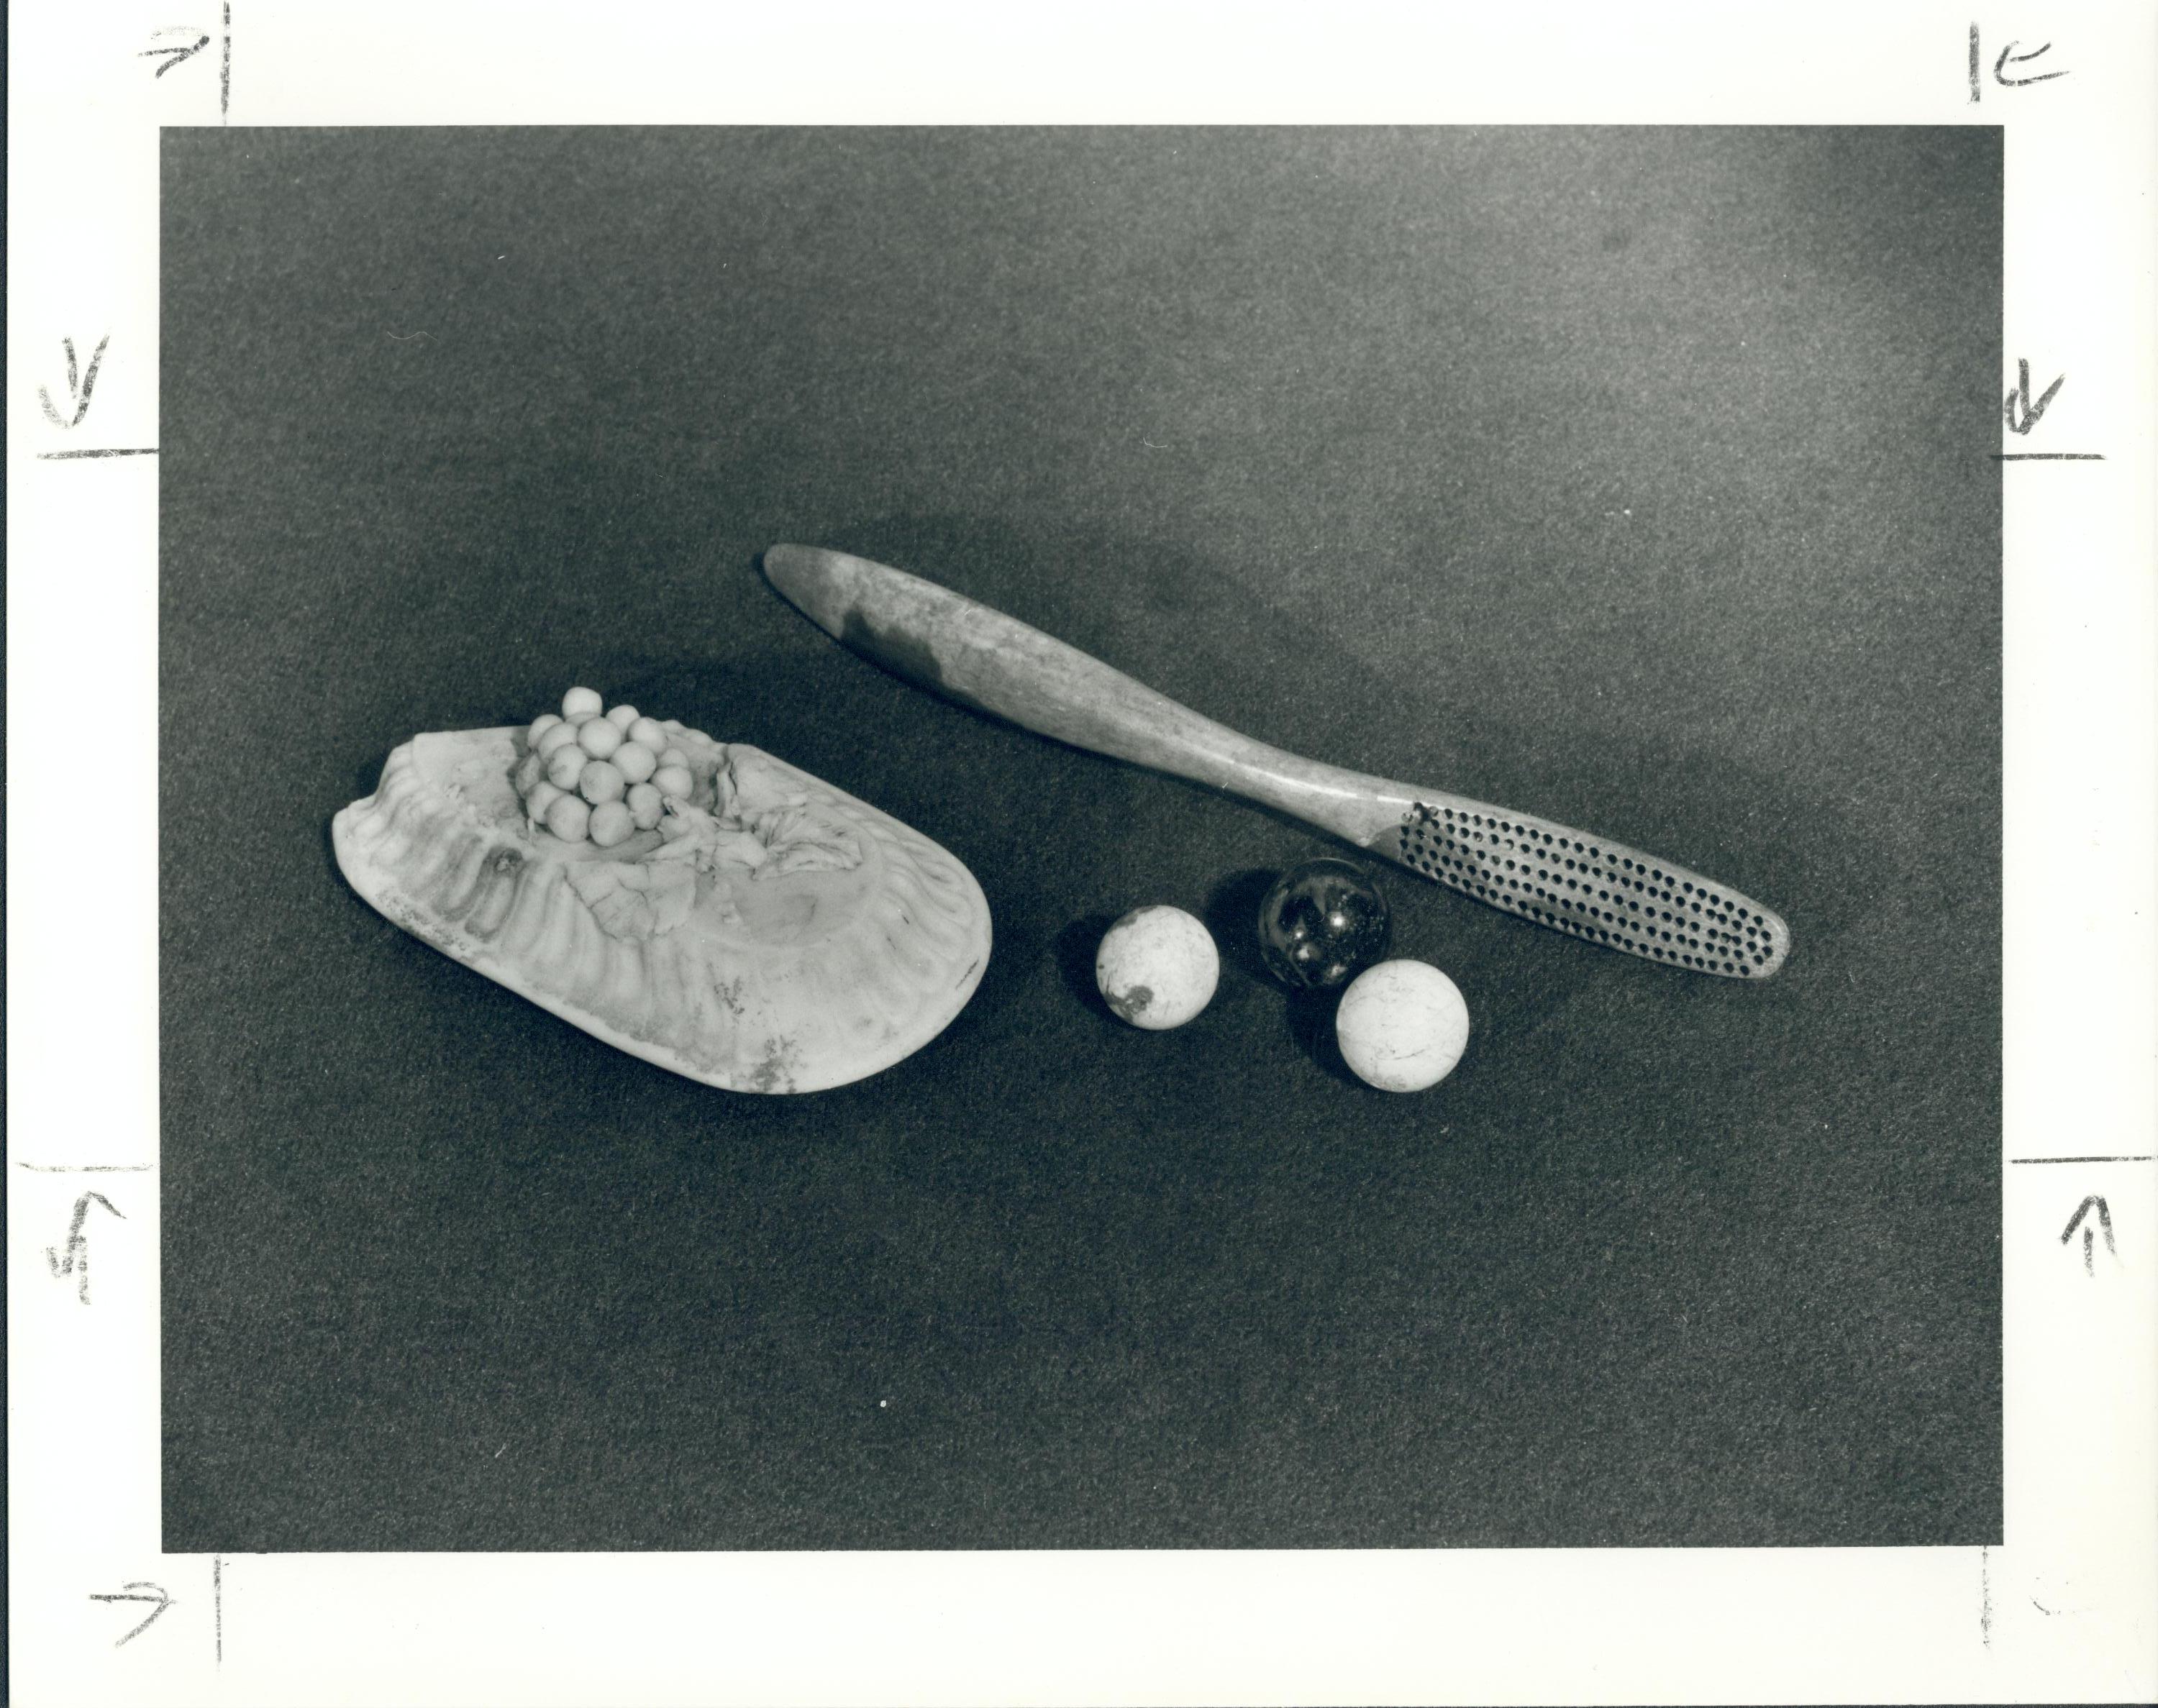 Artifacts found during 1950s Hagen archeology projects: Bone tooth brush handle, alabaster pin box lid, clay and glass marbles